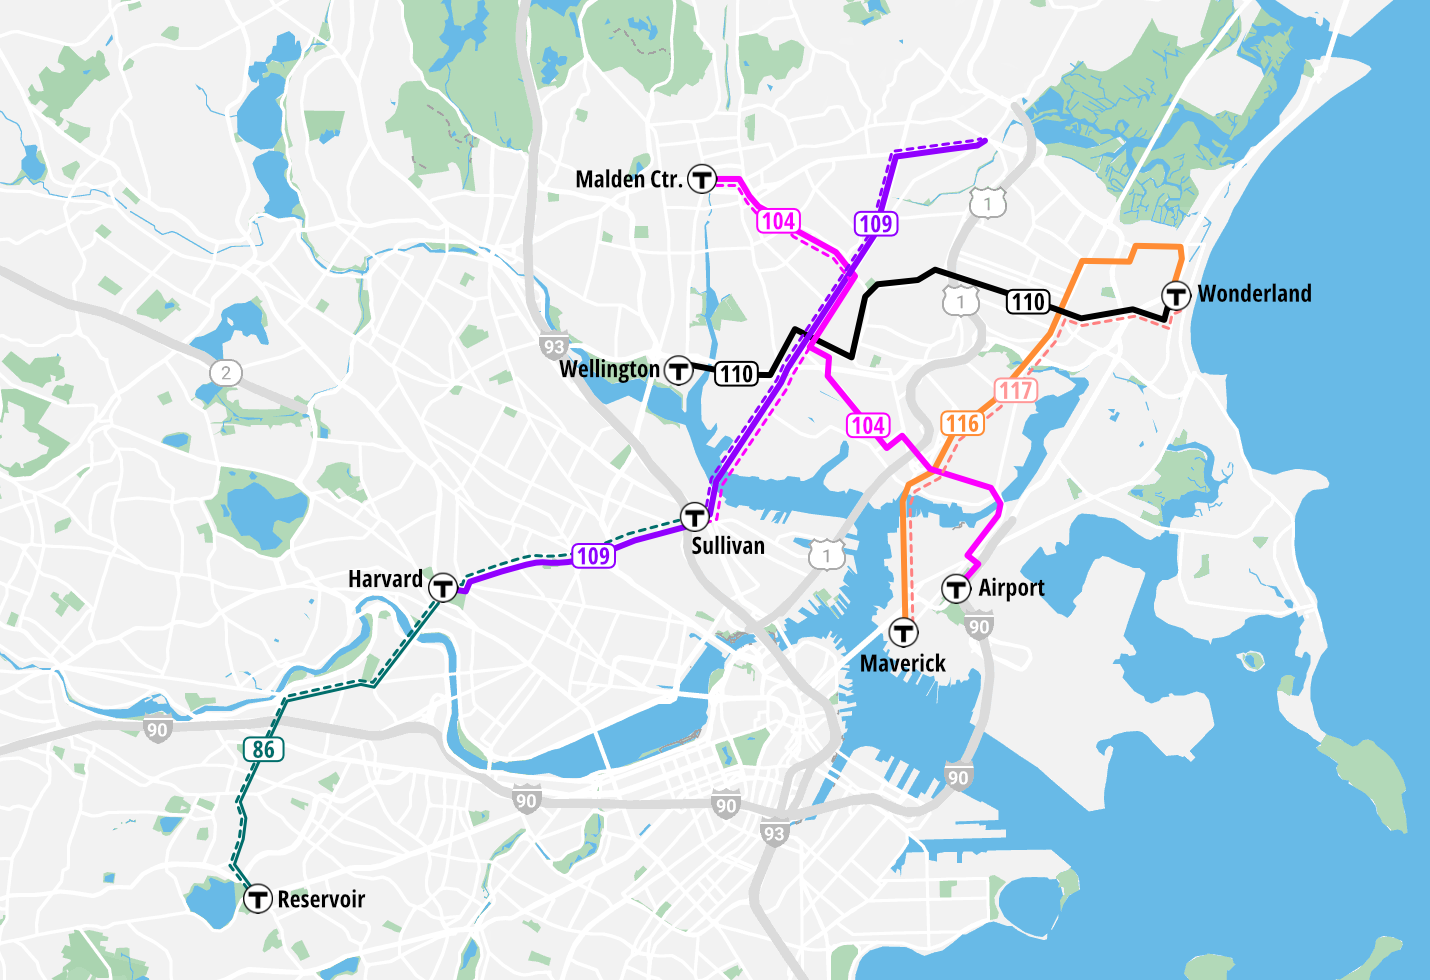 A map of the northern part of the Boston region showing proposed changes to five bus routes in Chelsea, Everett, Malden, Revere, and Somerville: the 86, in the lower left of the map, which runs between Reservoir Station and Sullivan Square today, but would be shortened to end at Harvard Square in the future; the proposed "frequent-service" 109, which runs through Everett to Sullivan today, and would extend to Harvard in the future to pick up the discontinued segment of the 86; the frequent-service 116, between Maverick and Wonderland, the frequent-service 104, between Airport and Malden Center, and the frequent-service 110, between Wellington and Wonderland.